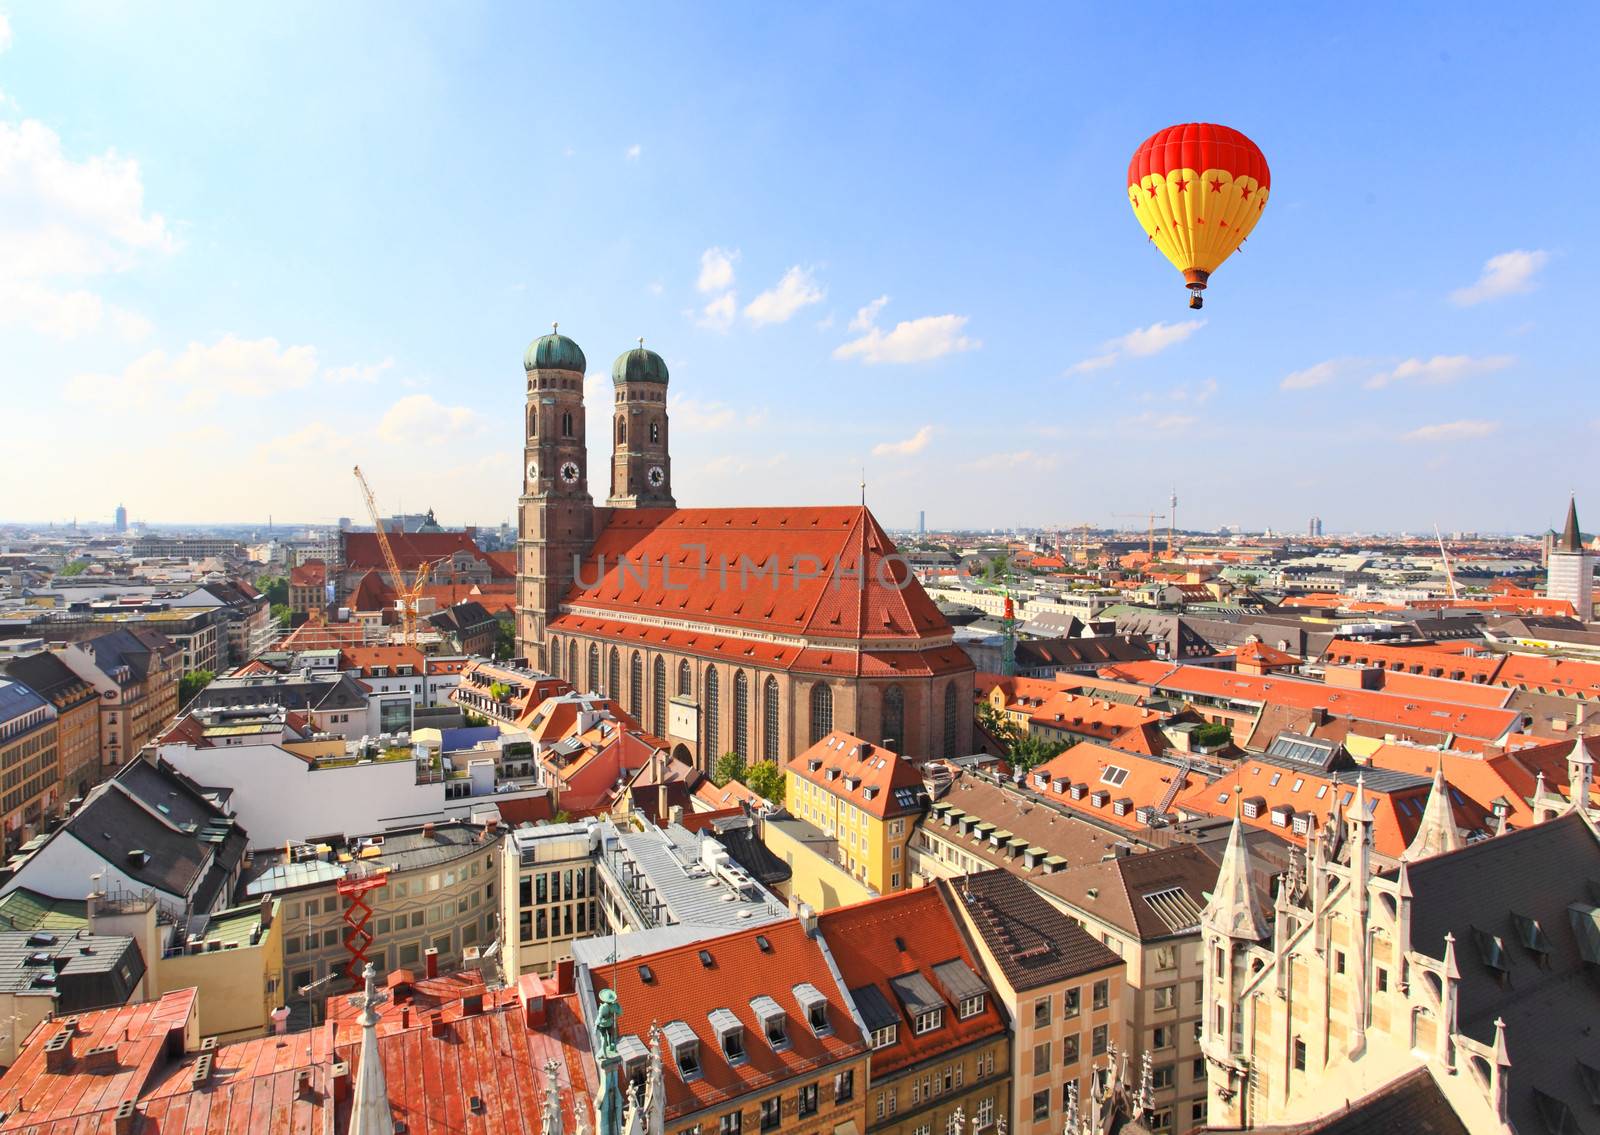 The aerial view of Munich city center by gary718